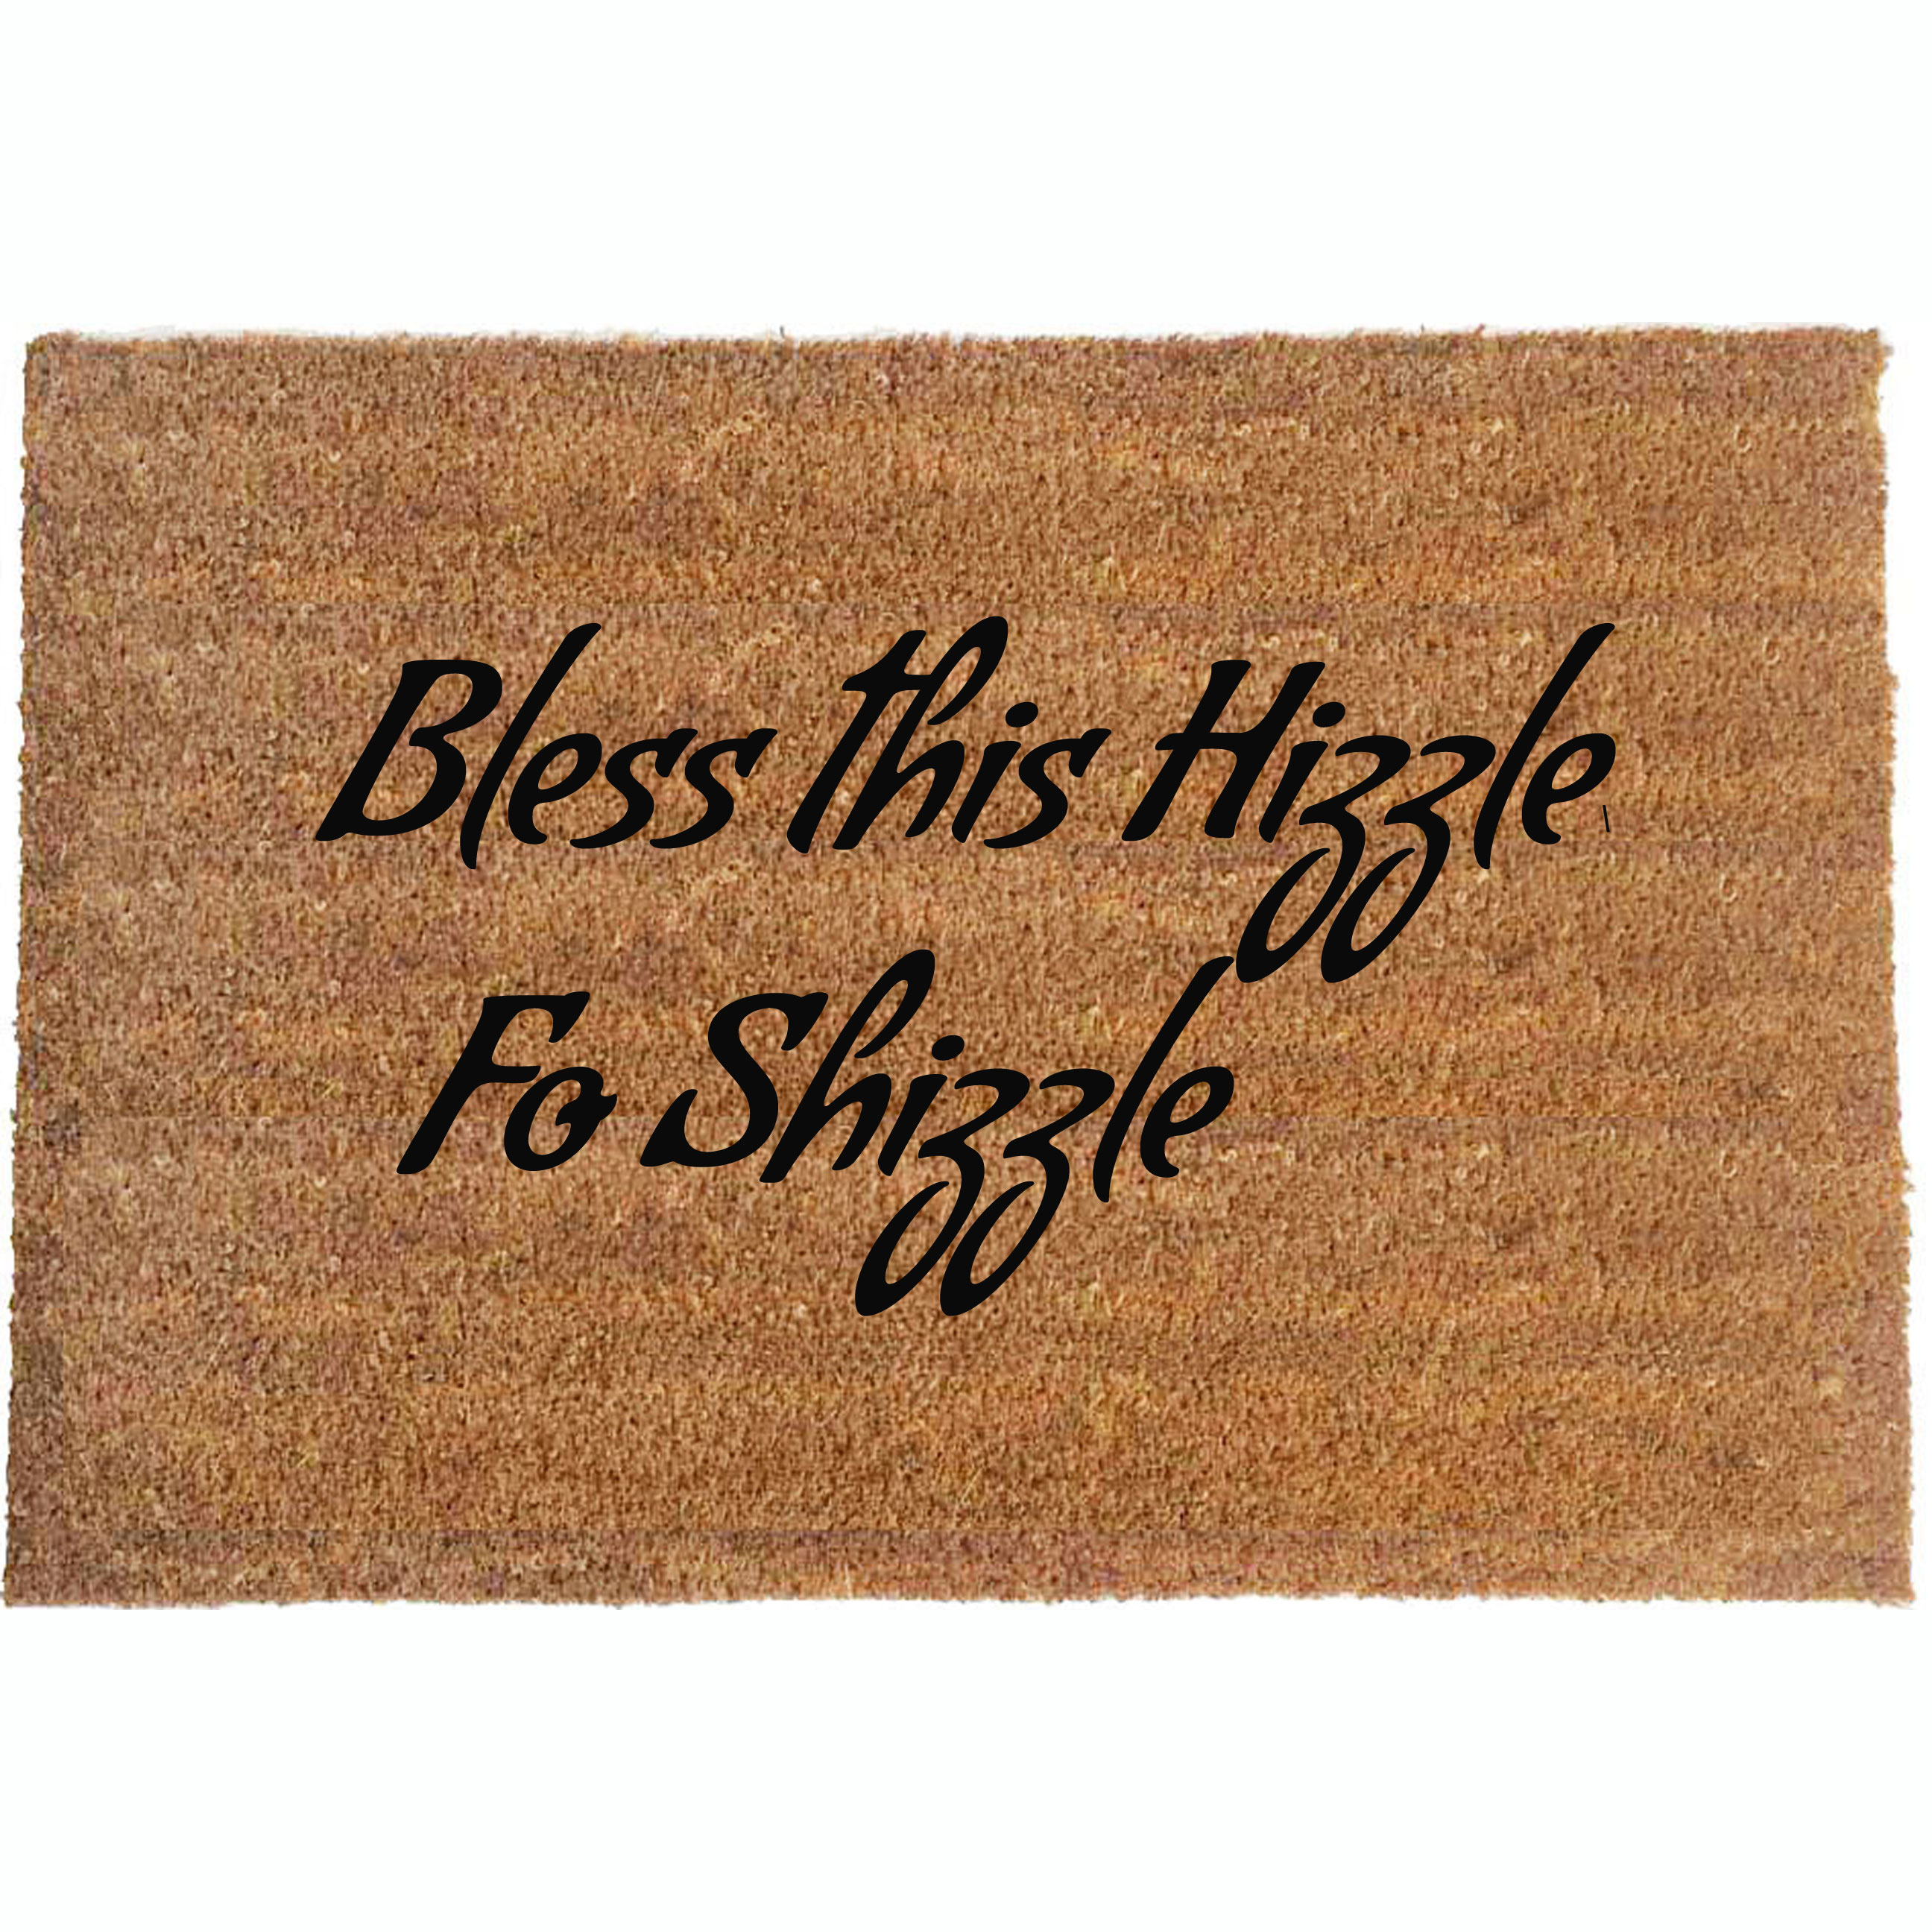 L W X 17.7 DoubleJun Funny Bless This Hizzle Fo' Shizzle Entrance Mat Floor Rug Indoor/Front Door Mats Home Decor Machine Washable Rubber Non Slip Backing 29.5 